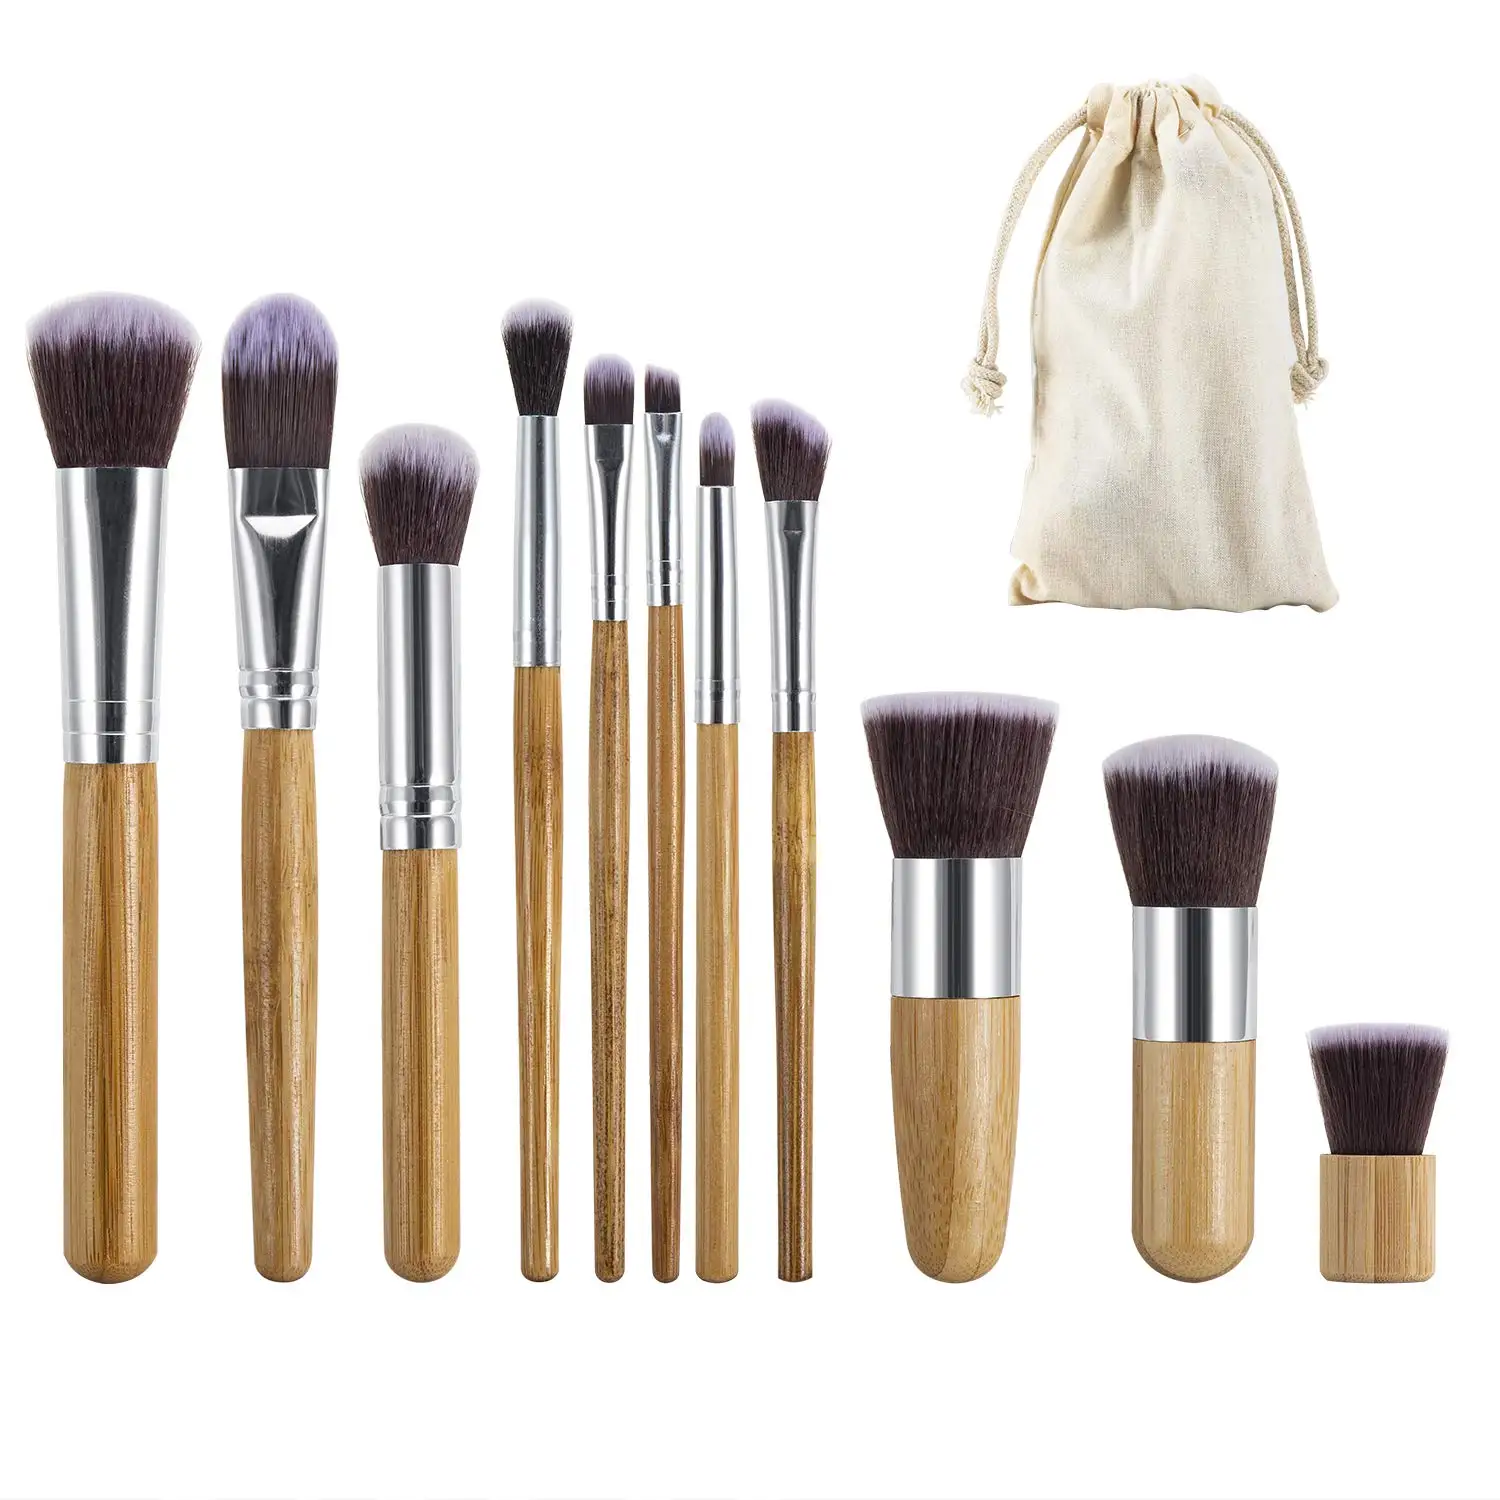 

BS-MALL 11pcs Wholesale Cosmetic Make Up Brush factory price vegan bamboo handle makeup brushes set, Picture or customized color